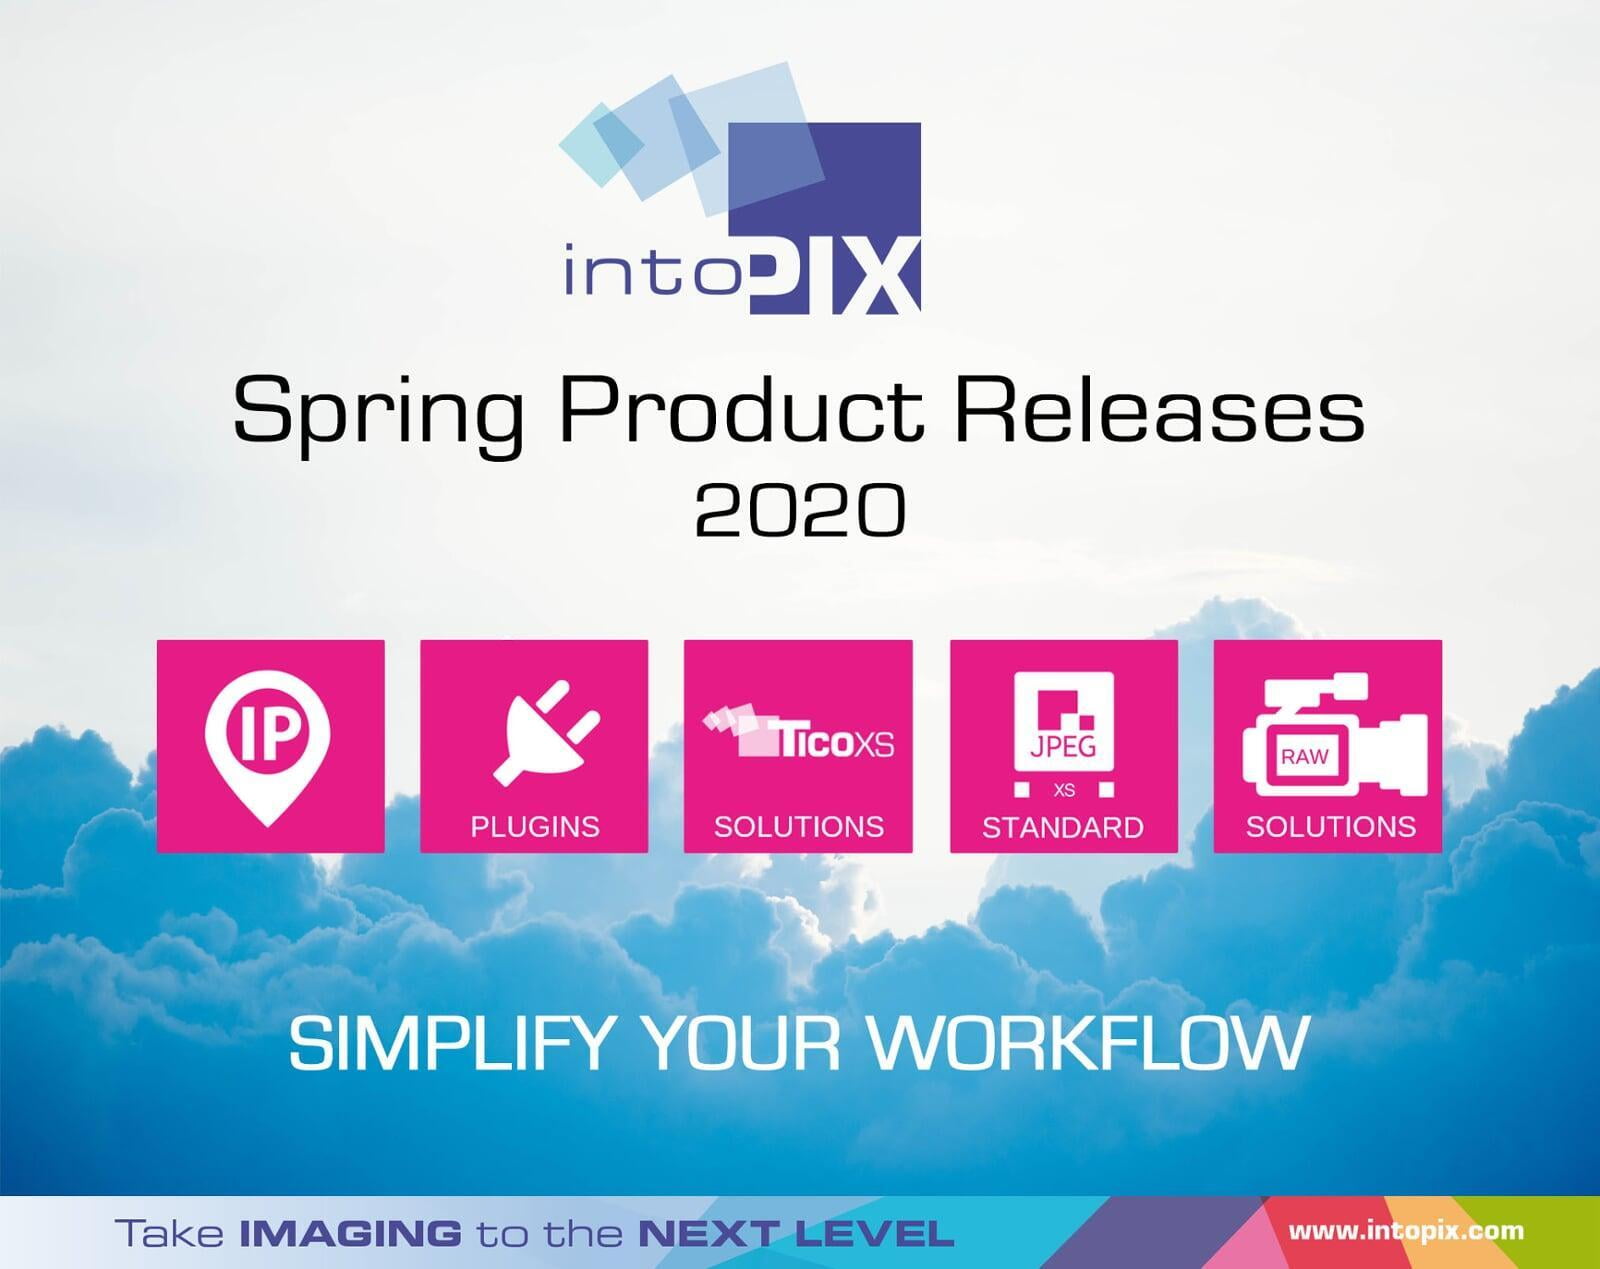 intoPIX Spring Product Releases 2020